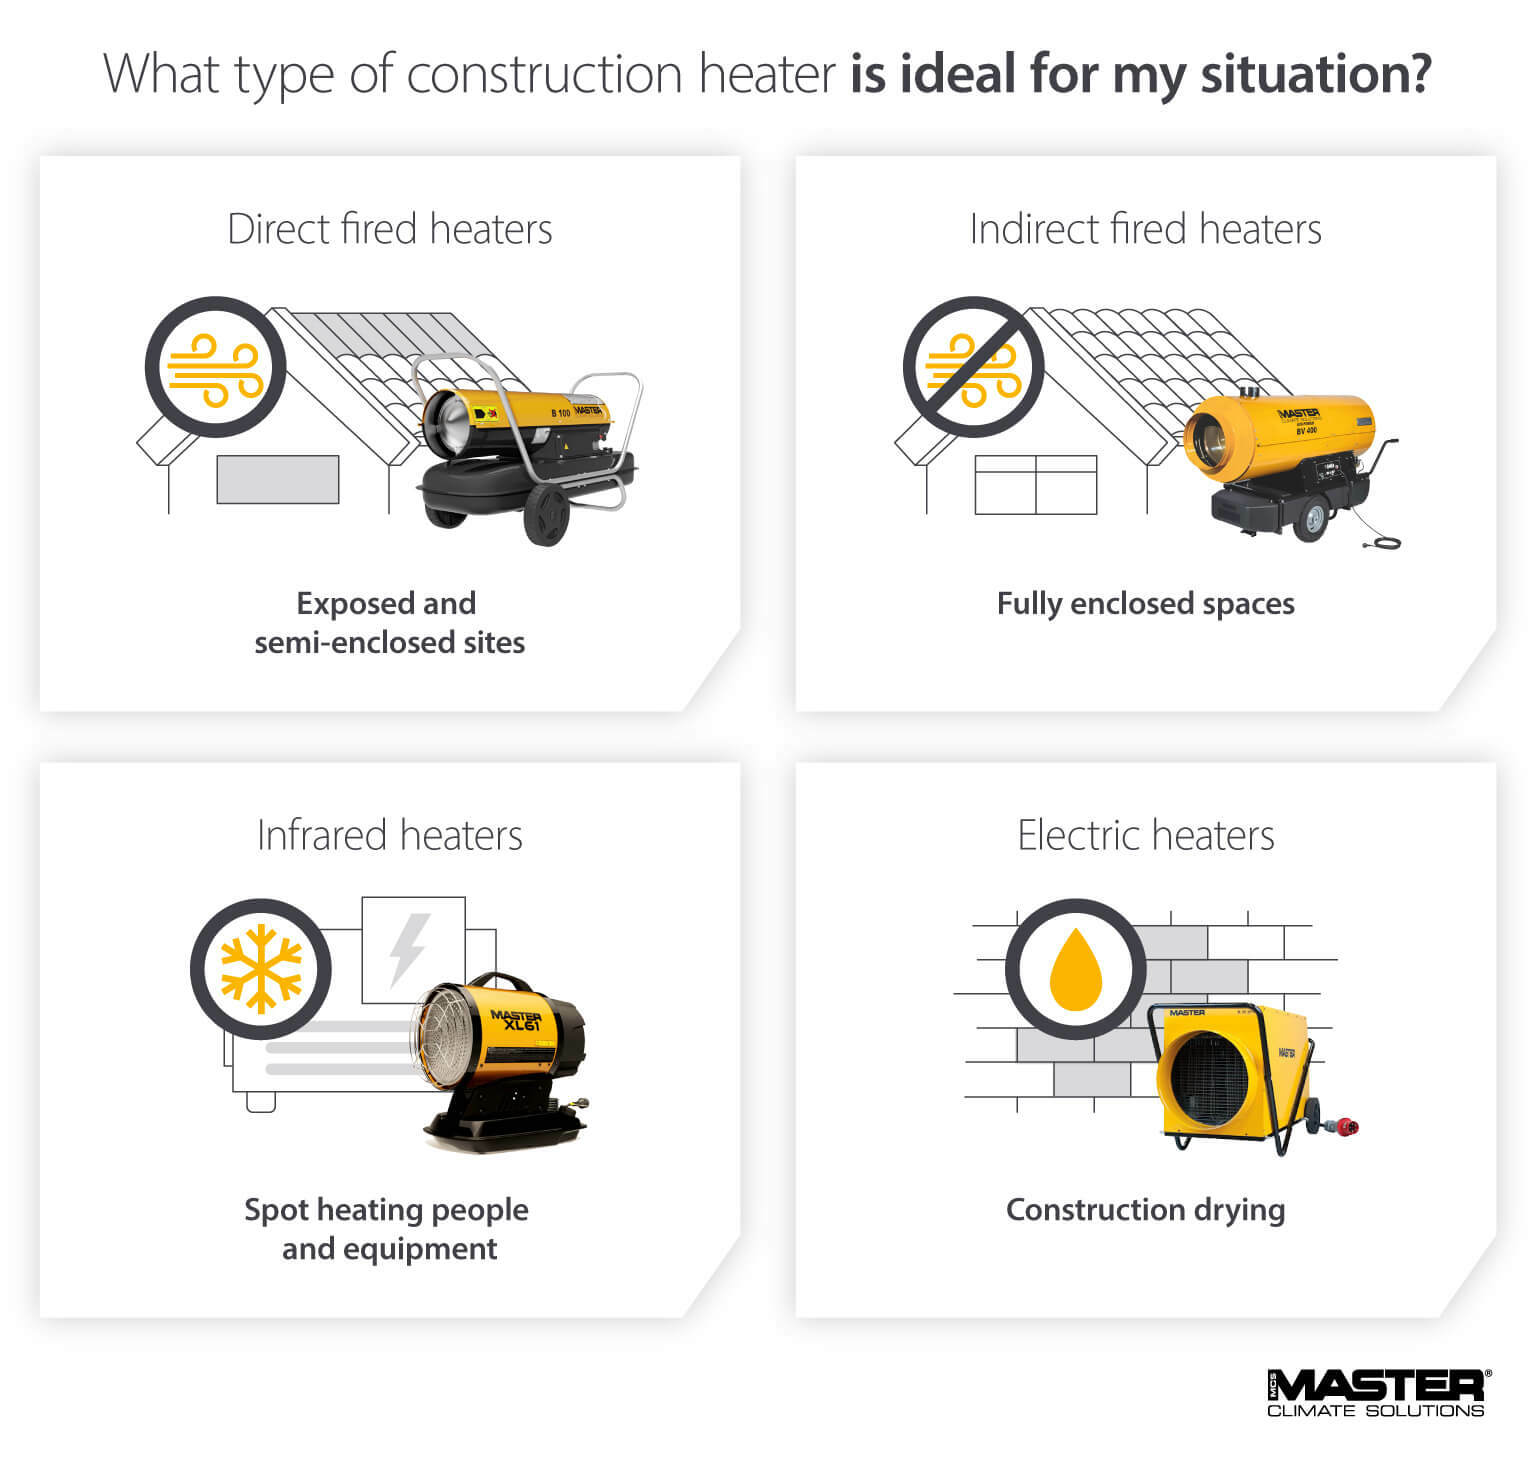 Image showing how heaters are used for construction. Comparing direct fired, indirect fired, infrared and electric heaters - Infographic